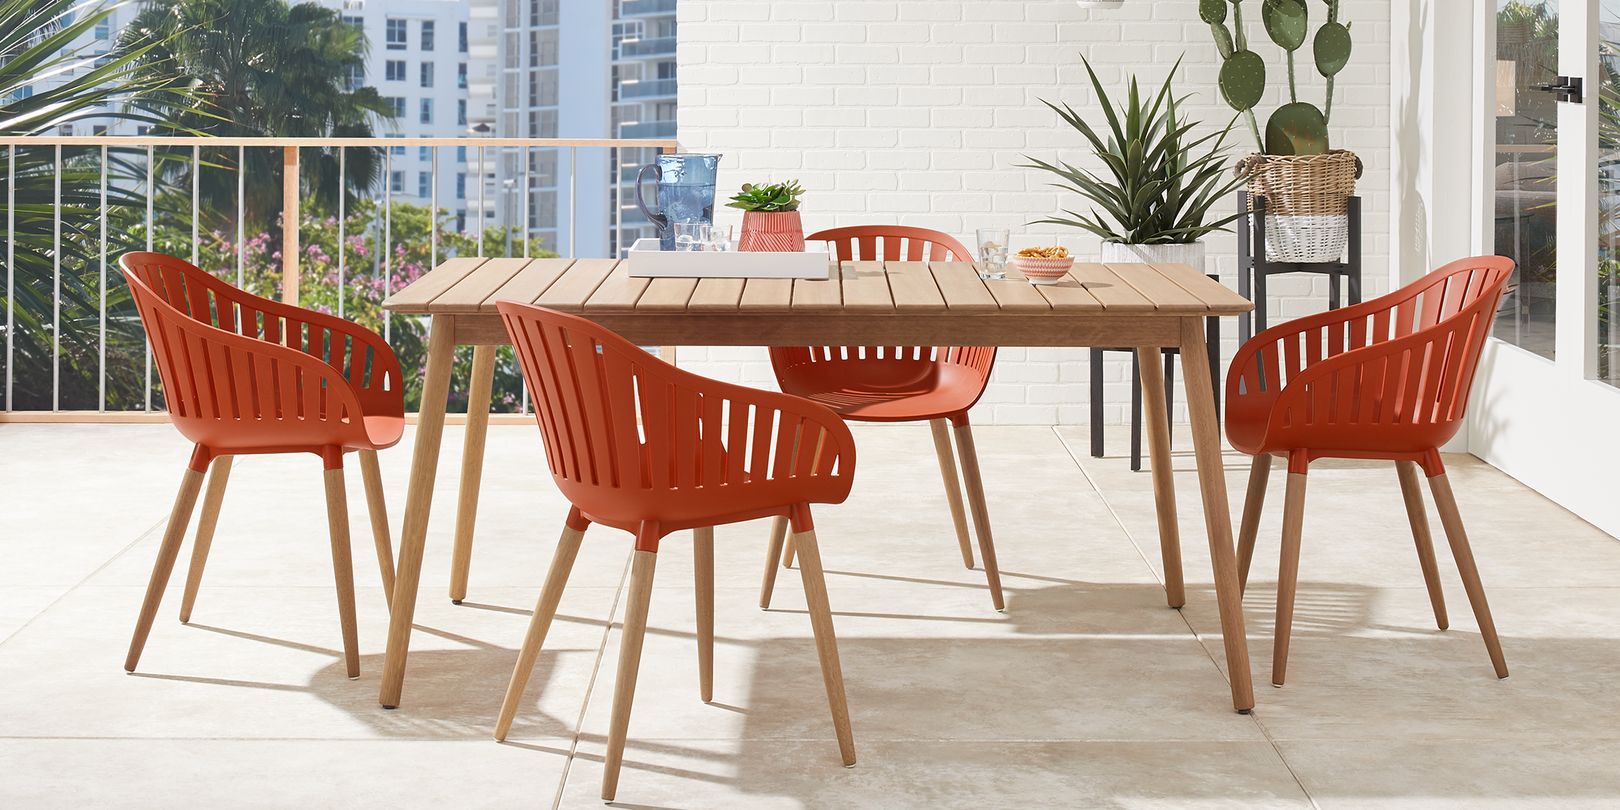 photo of teak dining table and orange chairs